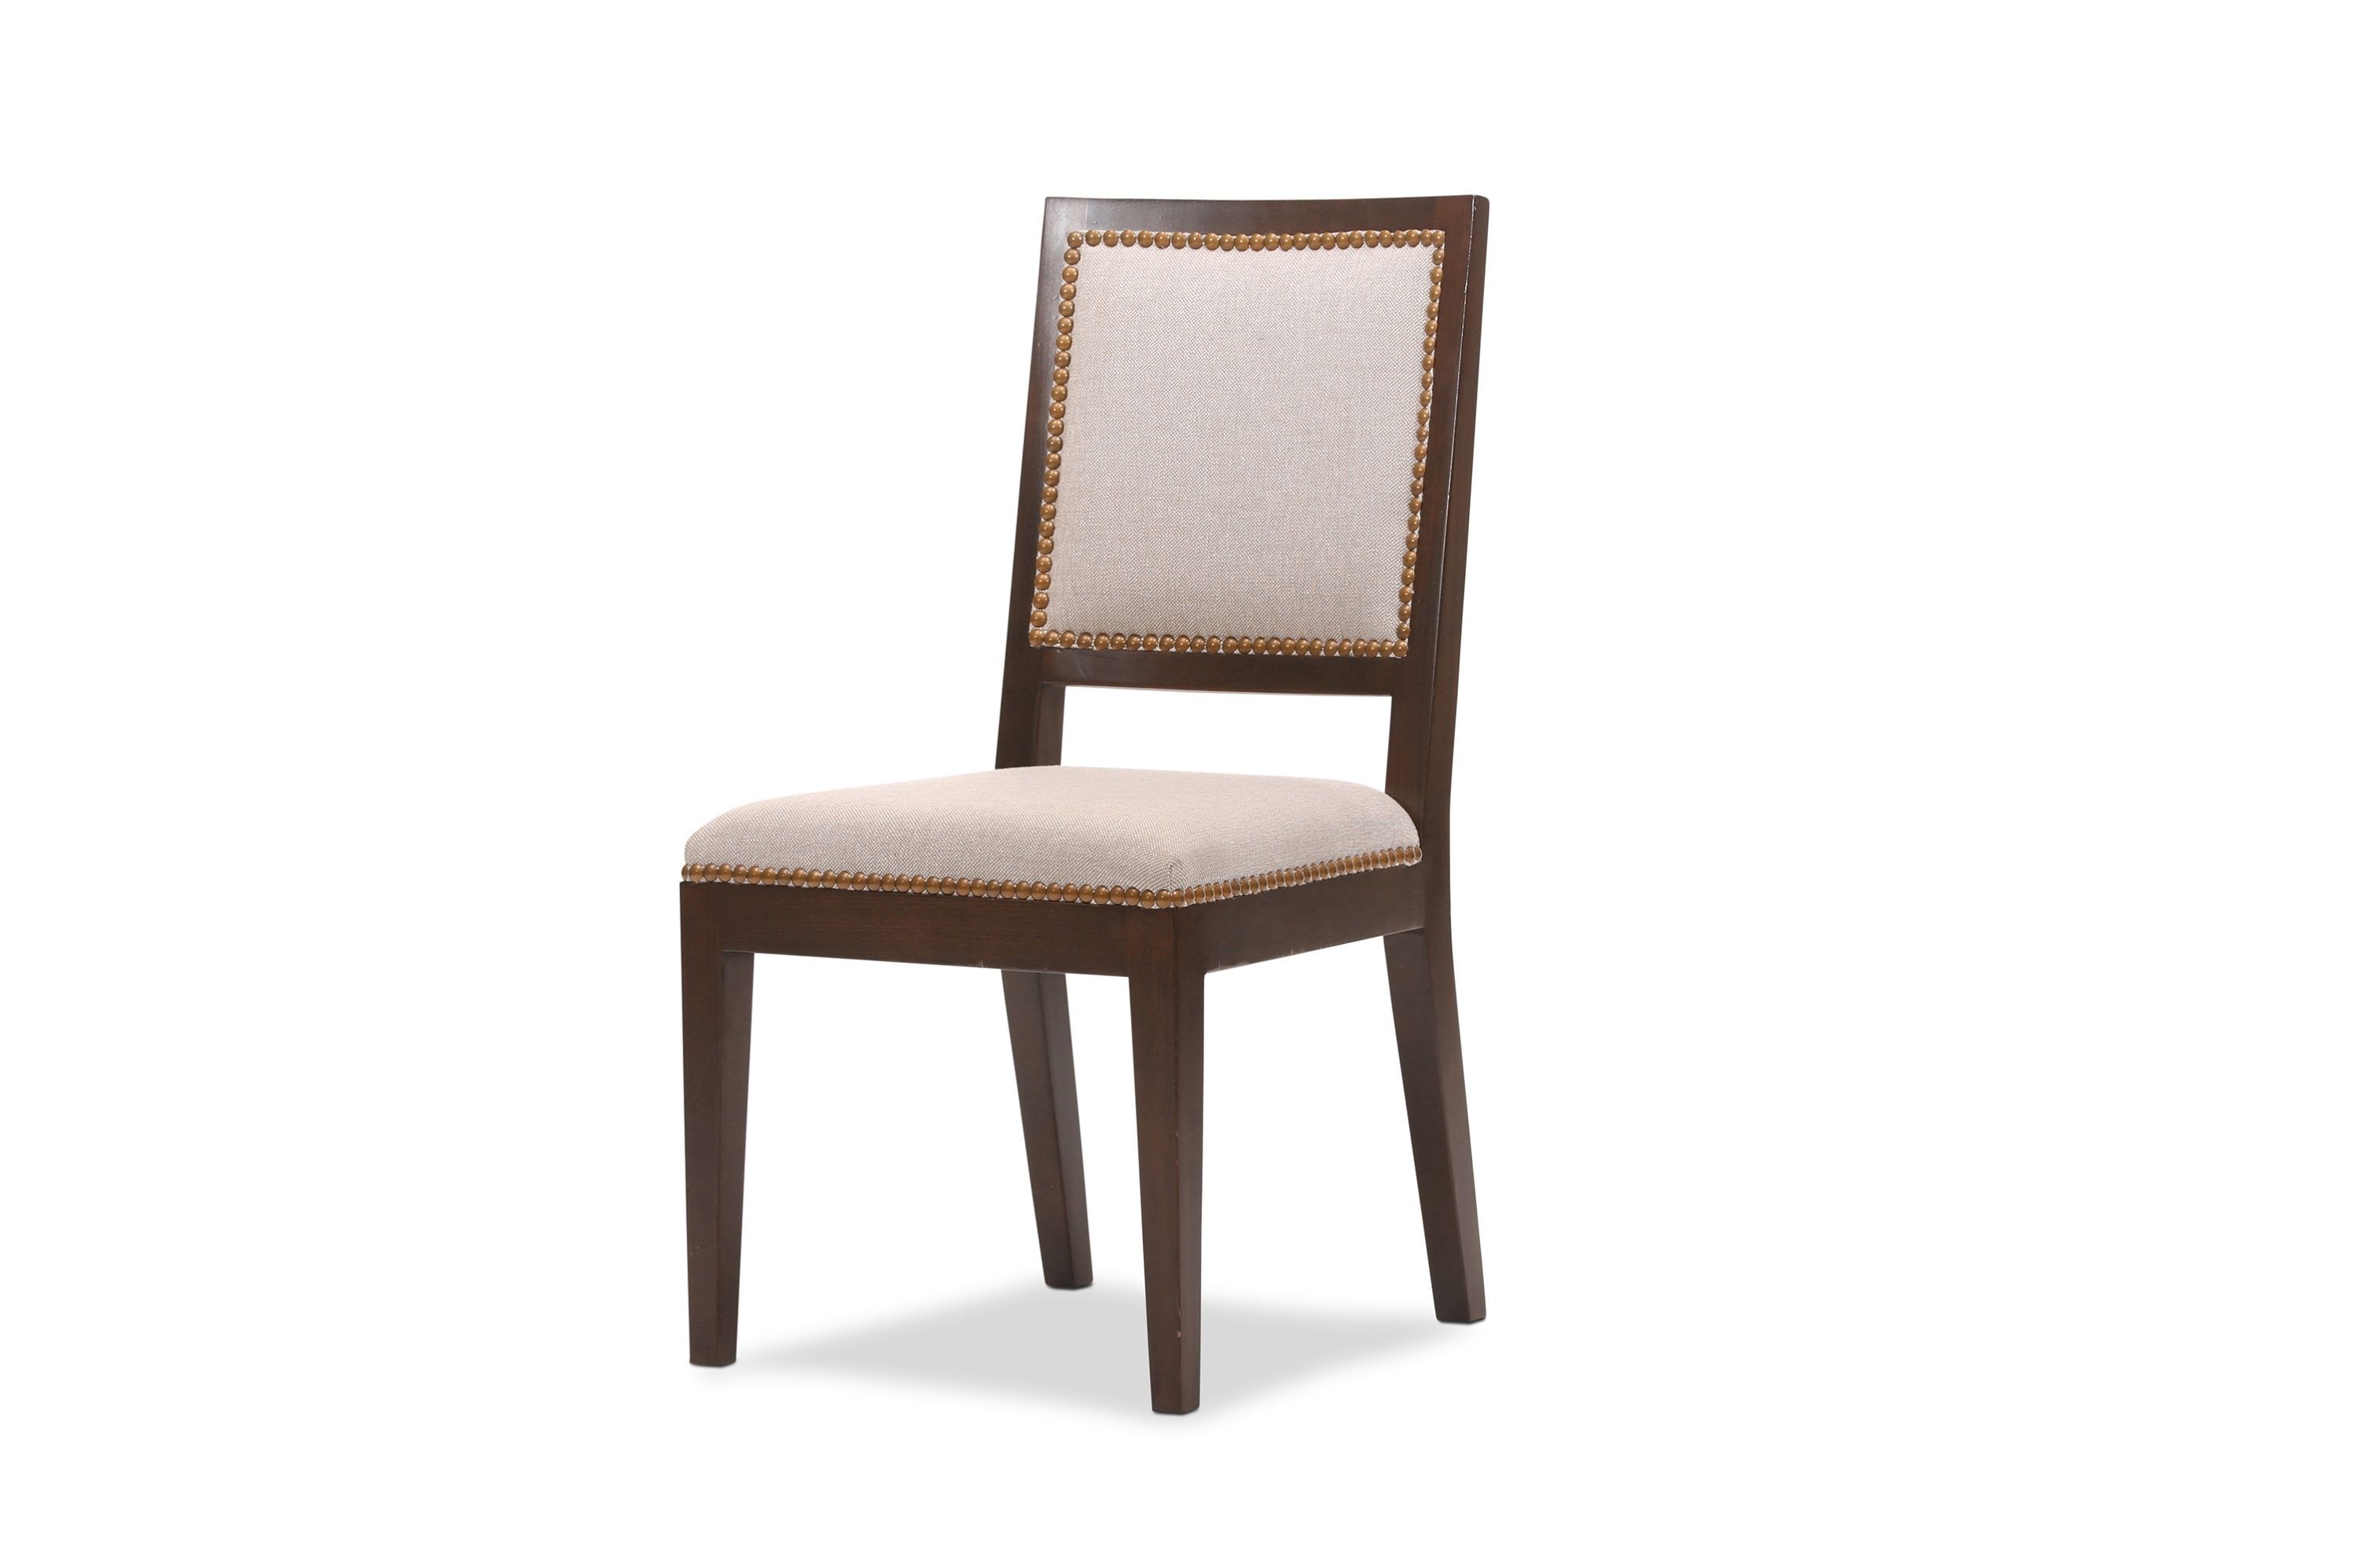 Most Recent Pacific Furniture – Custom Furniture – Nailhead Trim Dining Chair Intended For Cole Ii Black Side Chairs (View 16 of 20)